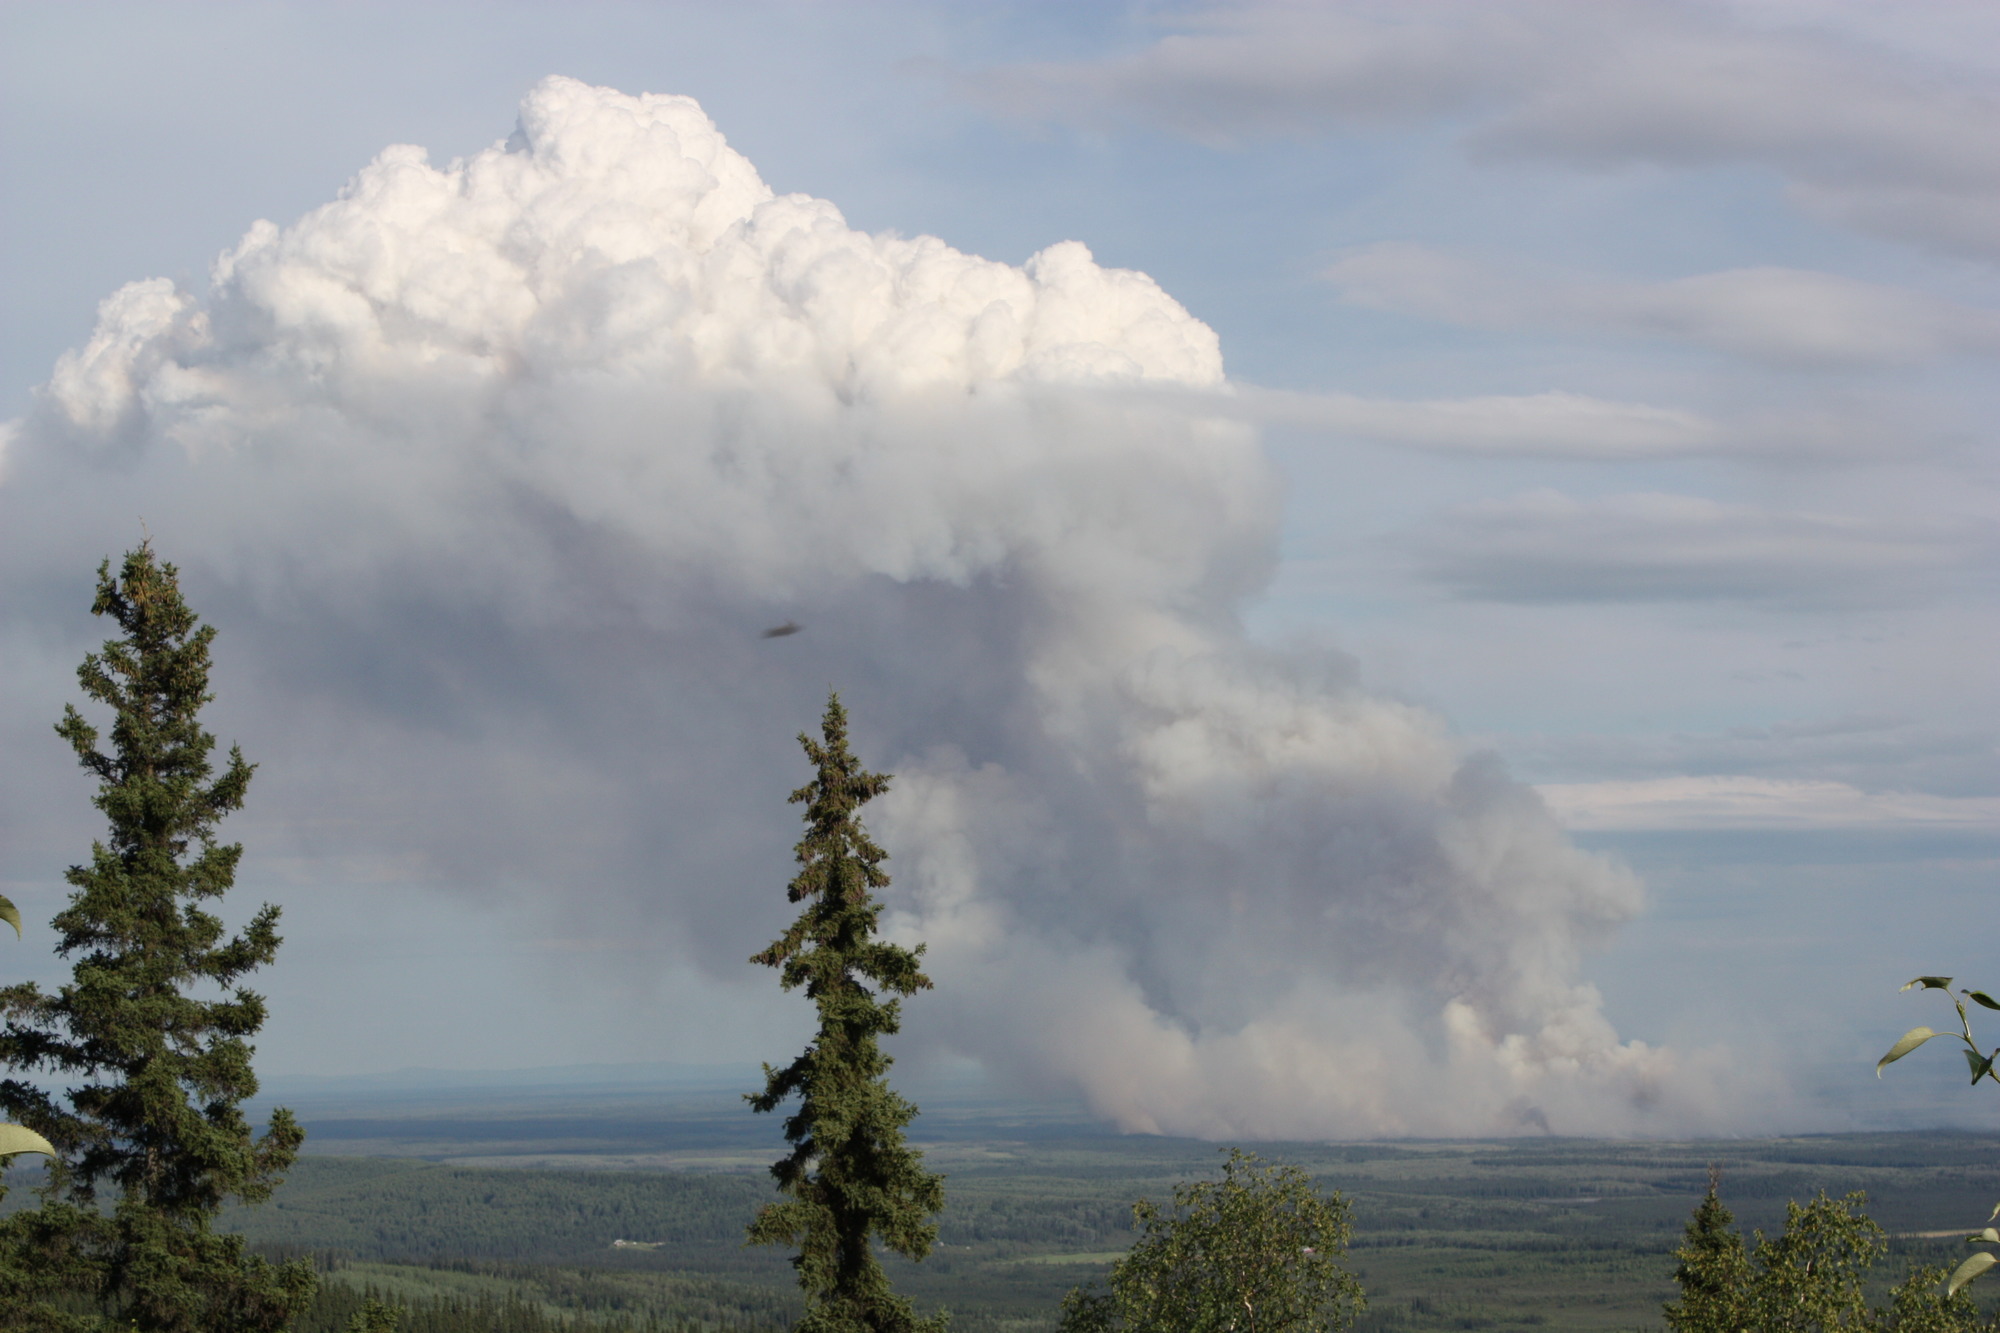 huge plume of smoke rising from a fire seen at a long distance